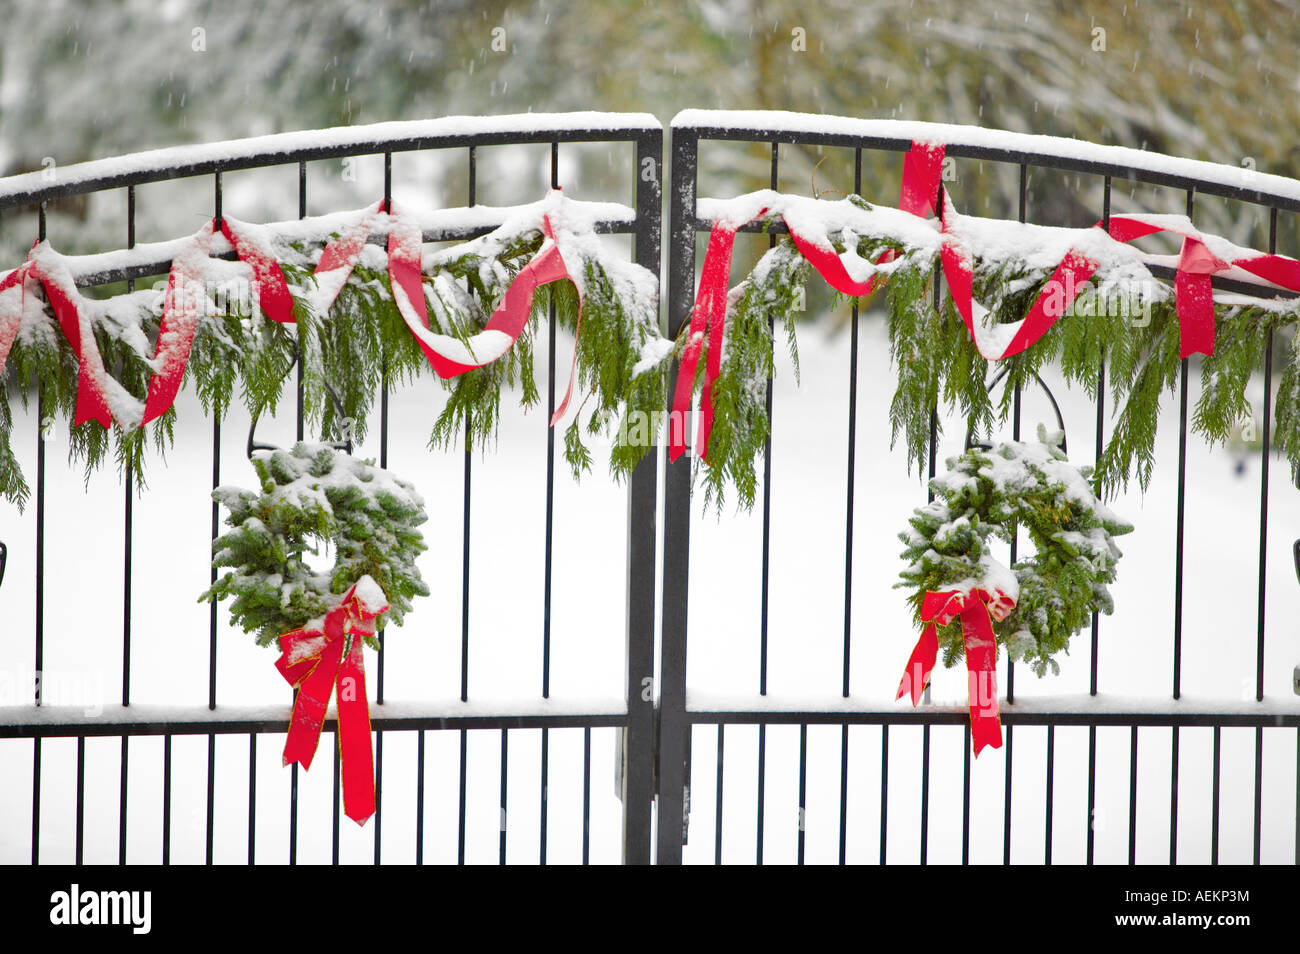 Gate with Christmas wreaths and decorations Stock Photo